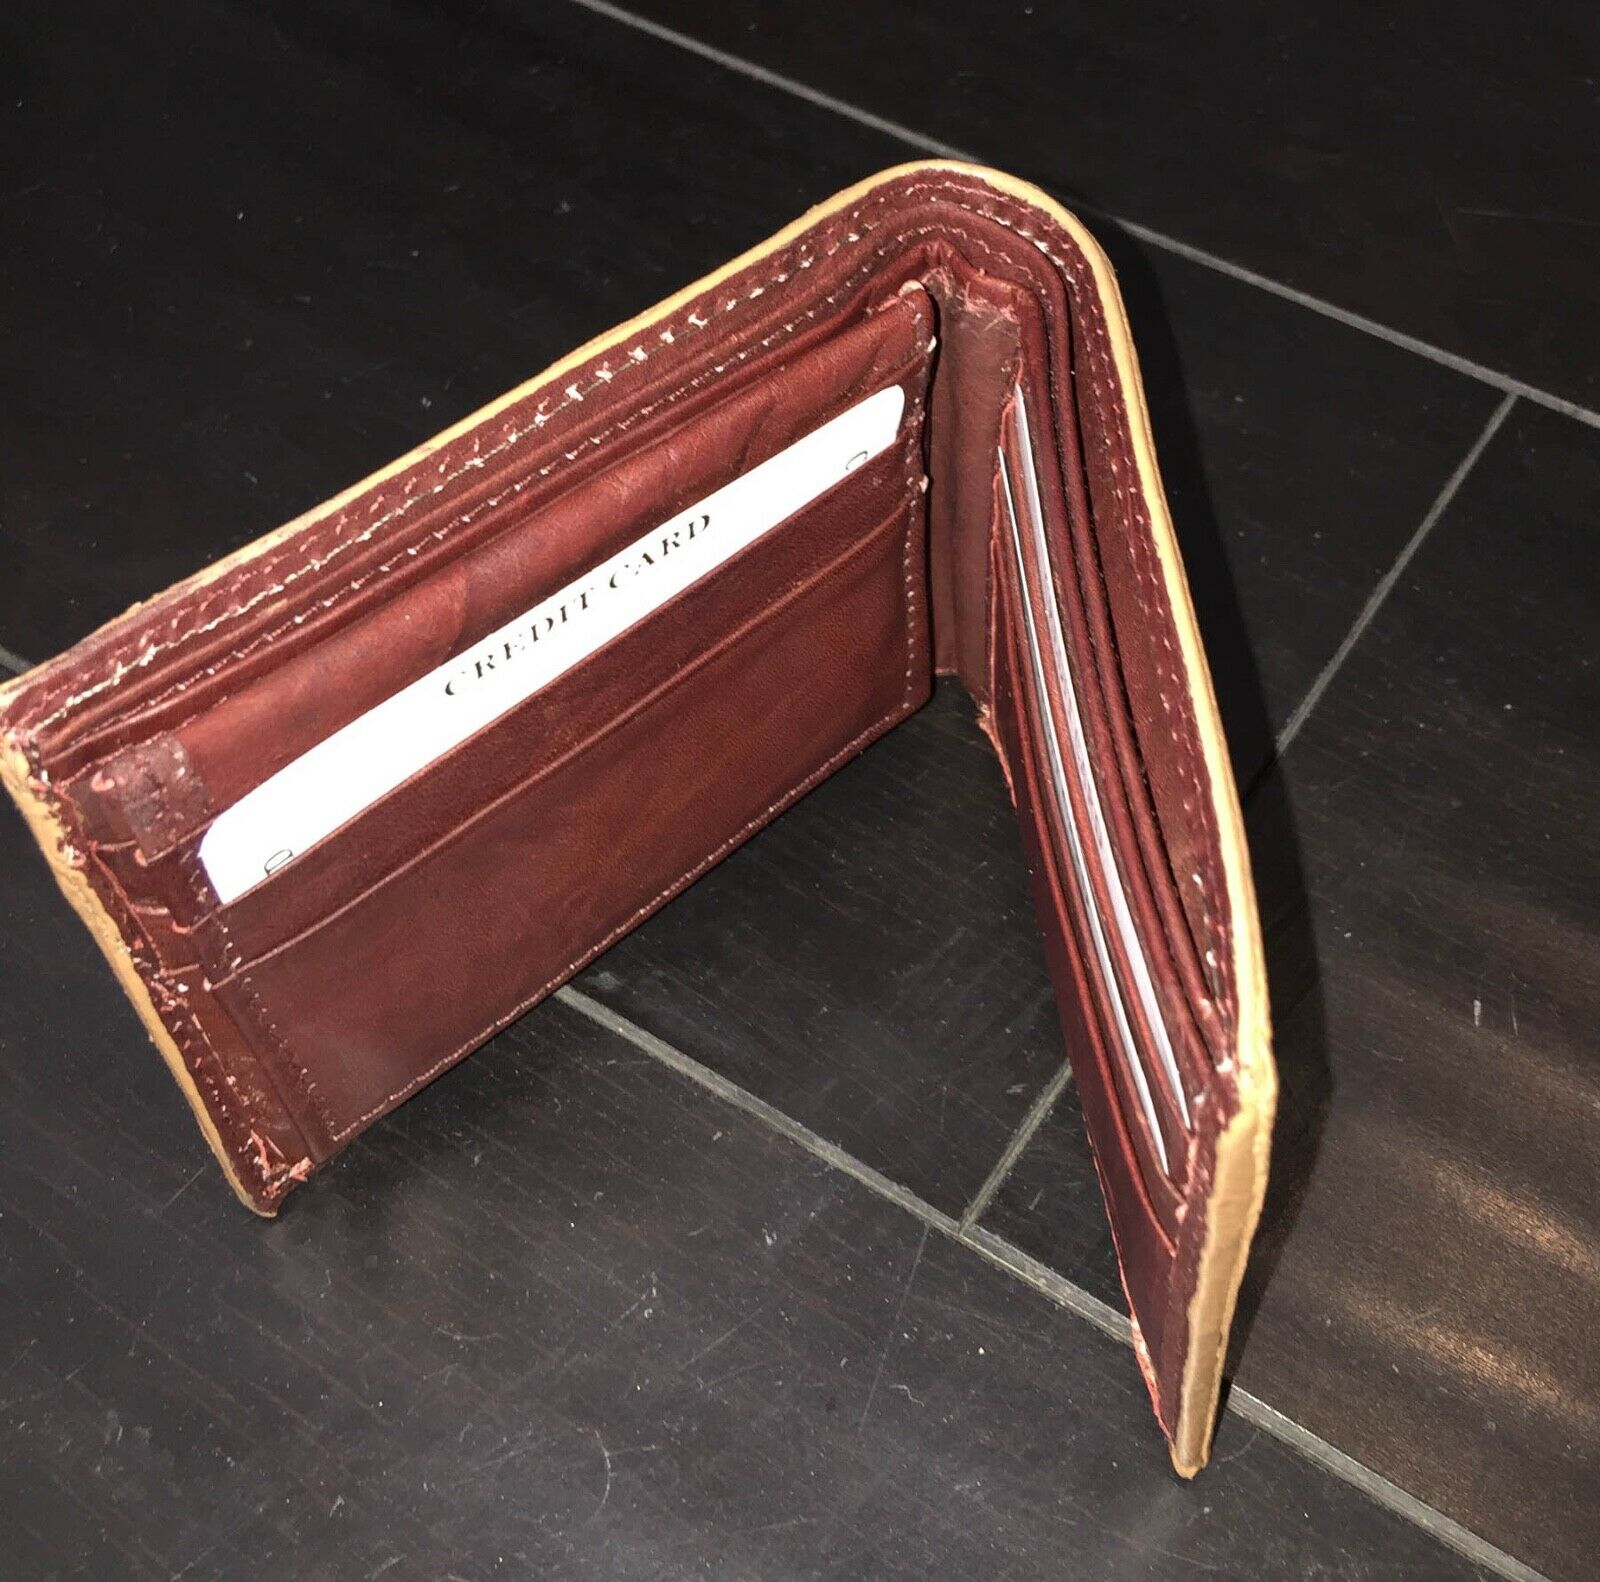 Sold at Auction: SAFARI GENUINE OSTRICH BROWN LEATHER WALLET